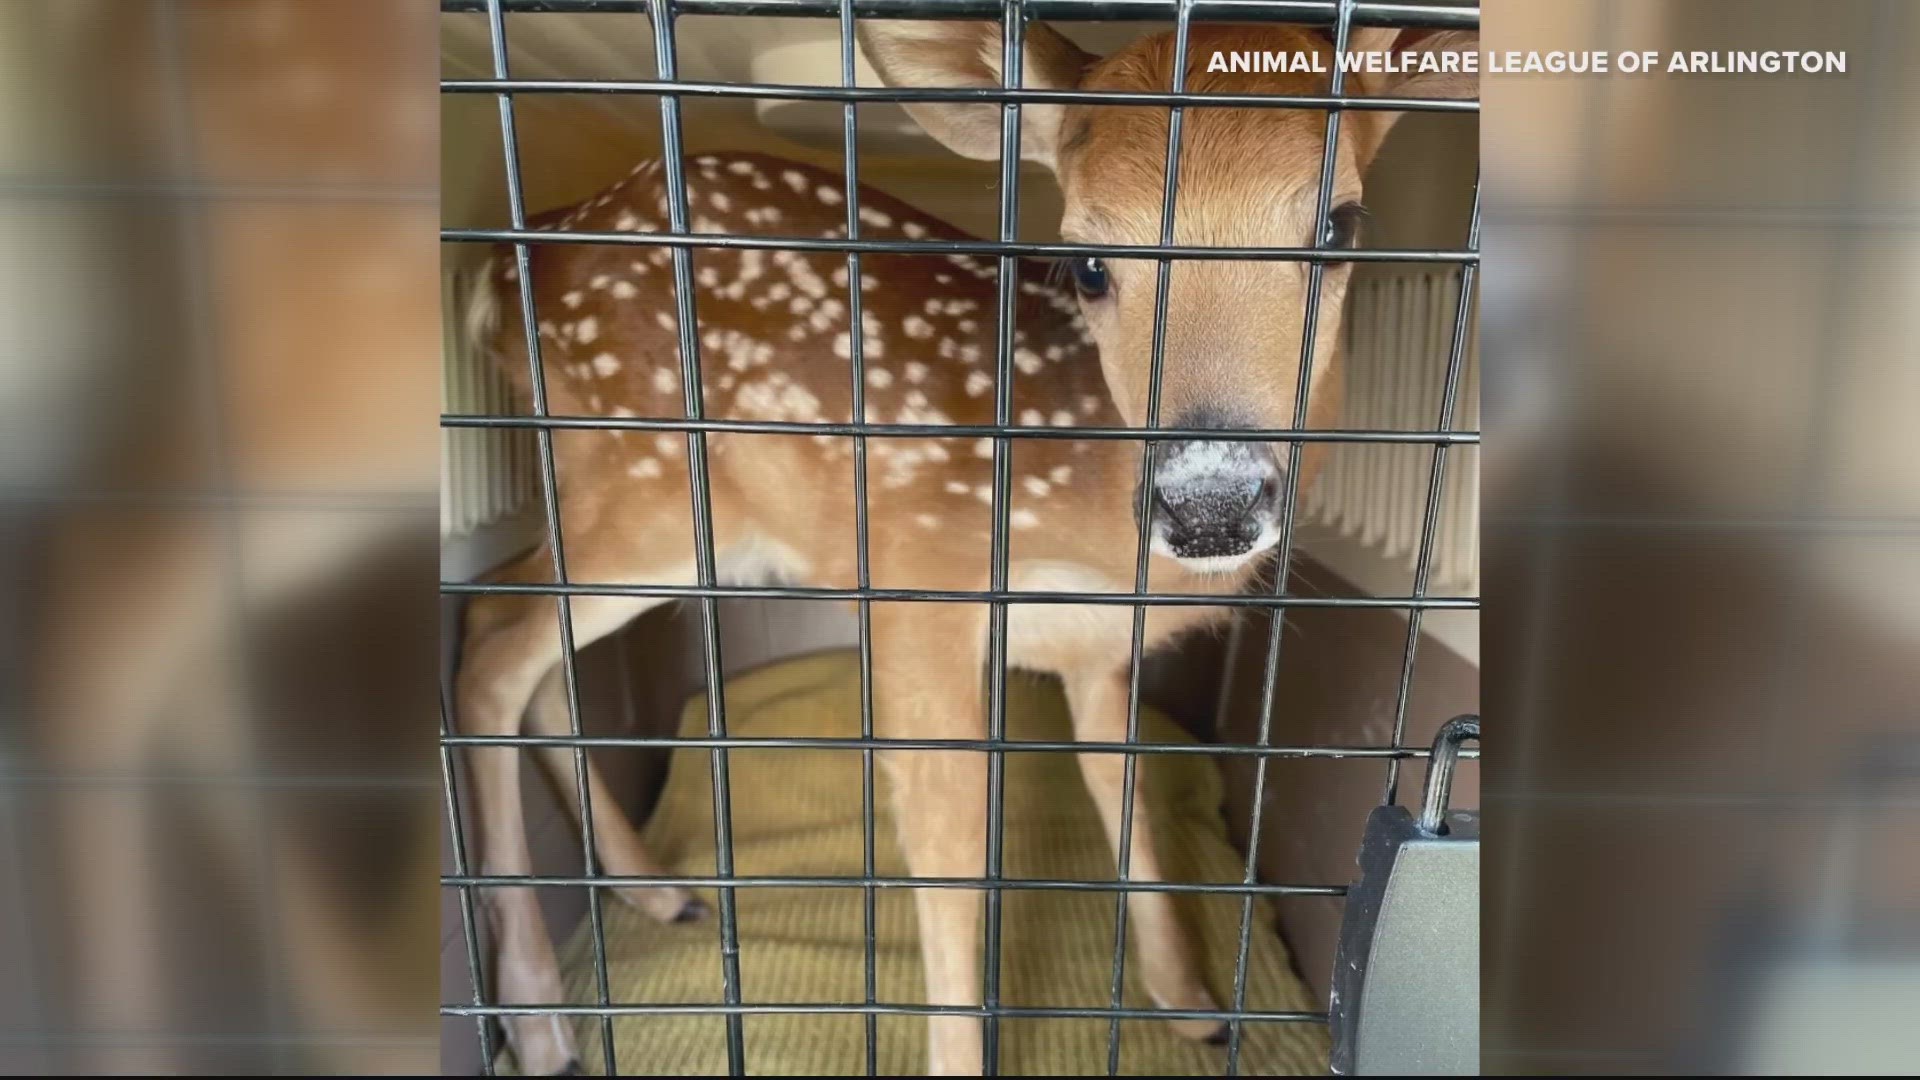 Newborn fawns are often found on lawns, in flower beds, gardens, bushes or areas of tall grass near homes. For their own welfare, leave them be.